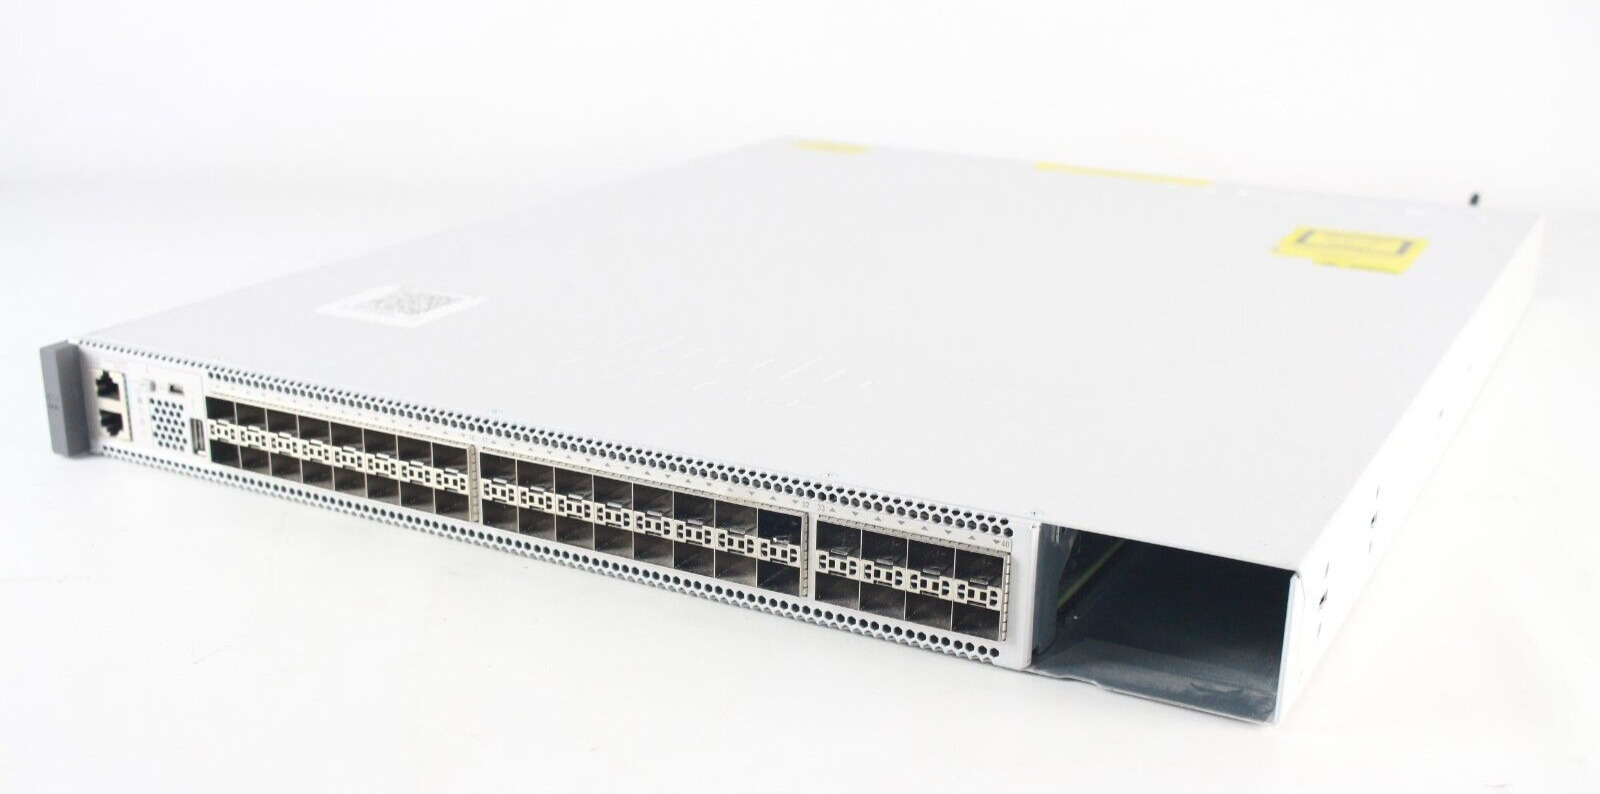 Cisco Catalyst 9500 Series Switch C9500-48X-A 40-Port 10GE SFP w/ Cables (BH)